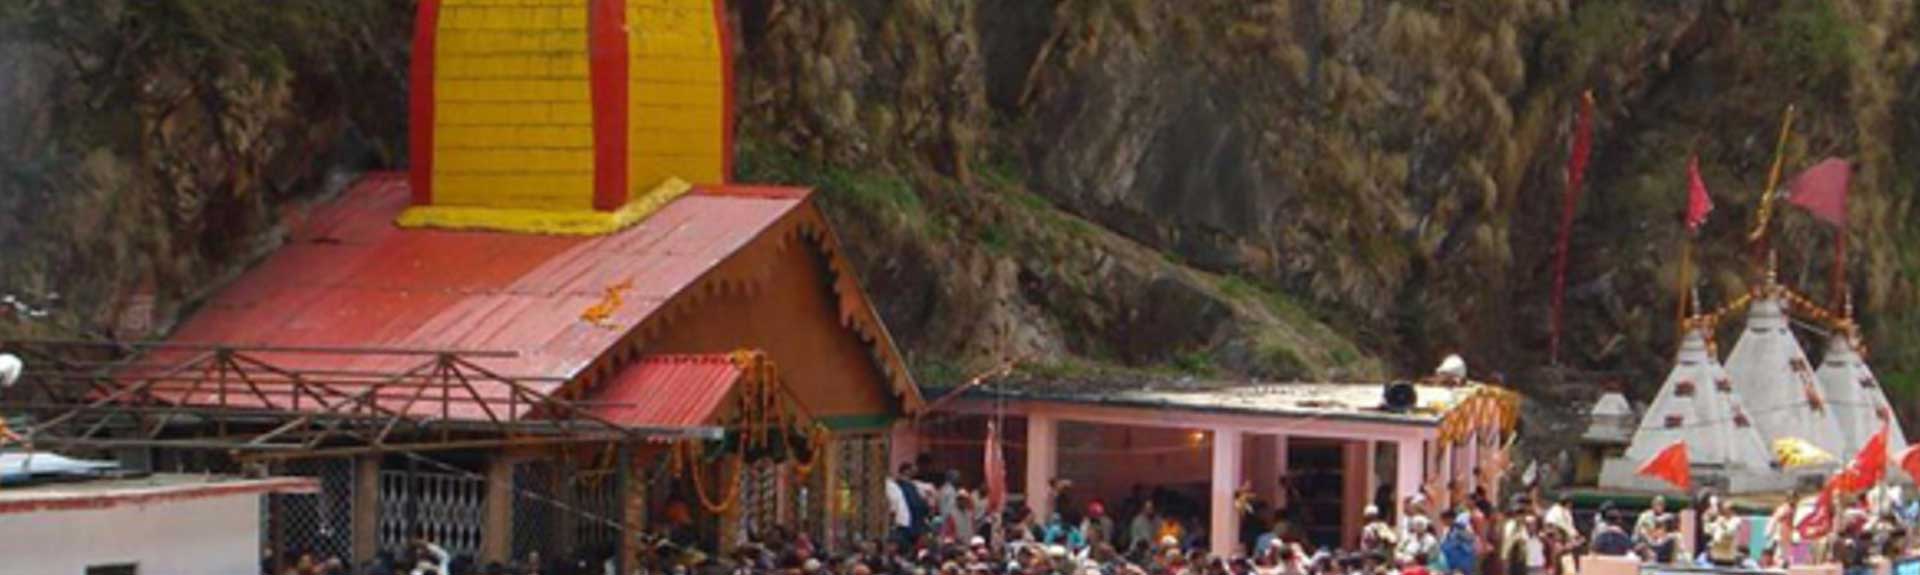 Budget Char Dham Tourism Hotel Booking